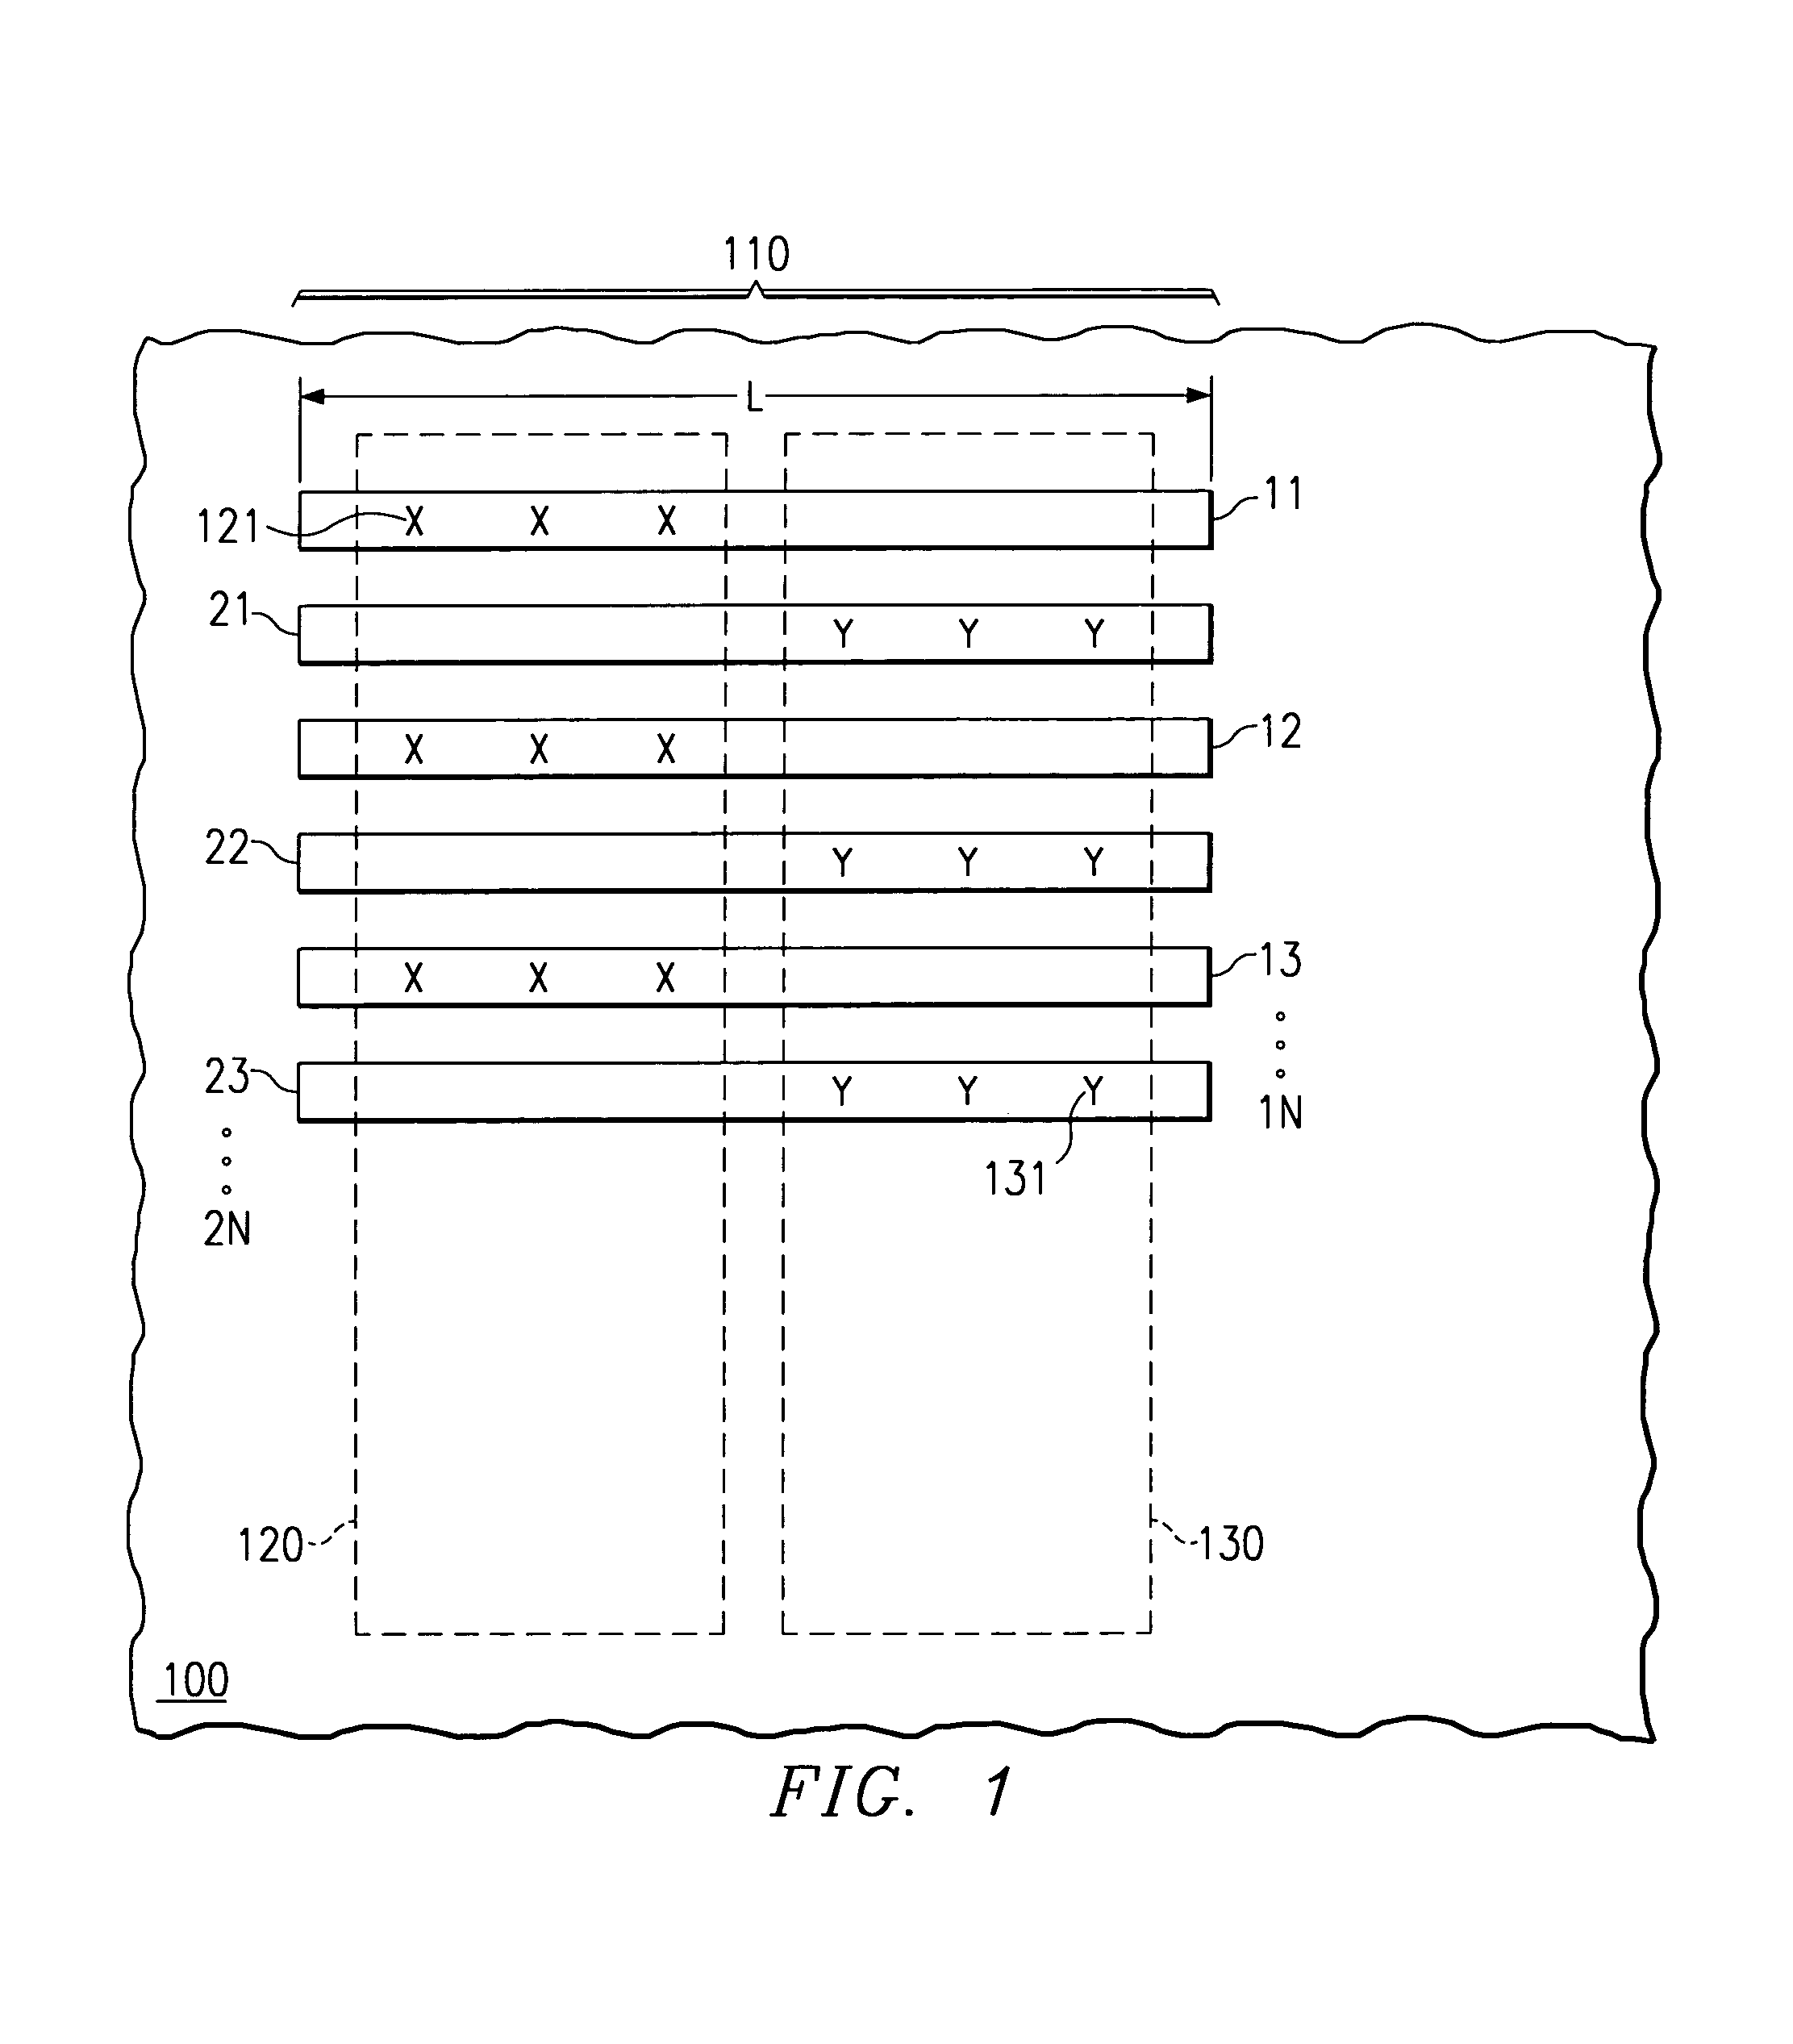 Integrated power circuits with distributed bonding and current flow